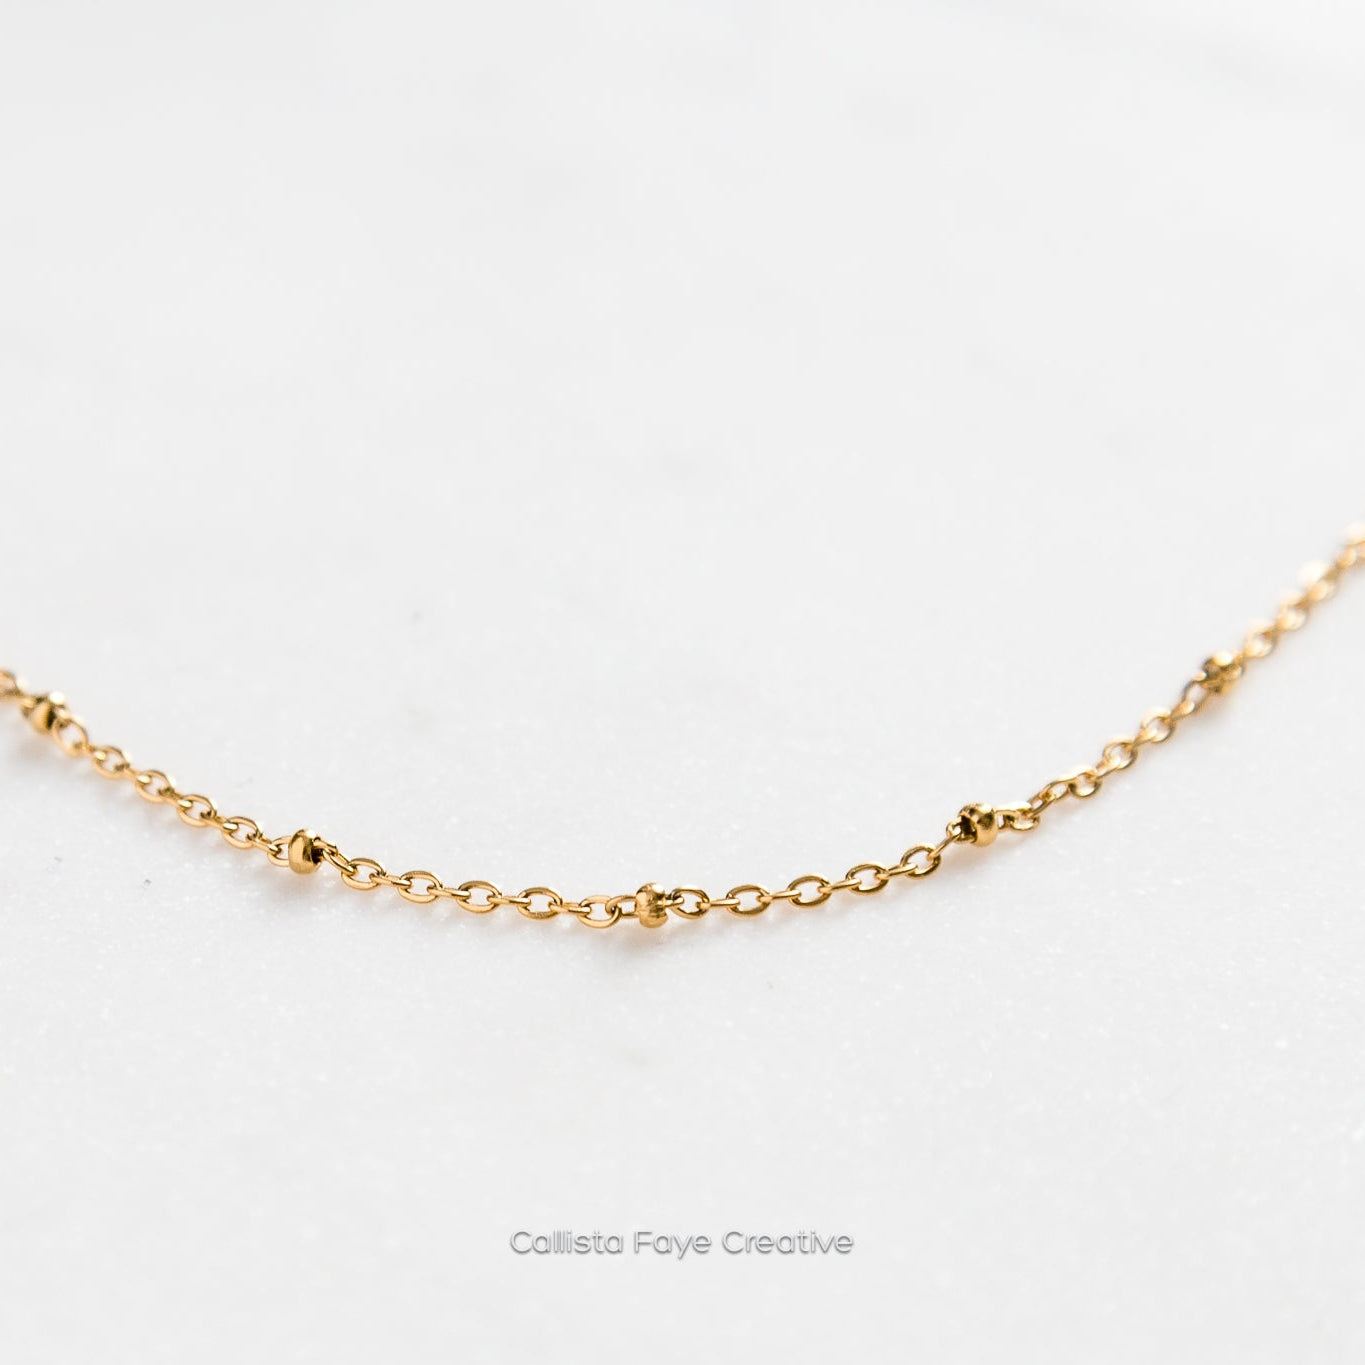 Satellite Chain, Dainty Layering Necklace, Stainless Steel Jewelry, Minimalist Necklace, Waterproof Jewelry, Dainty Necklace Necklaces callistafaye Gold  